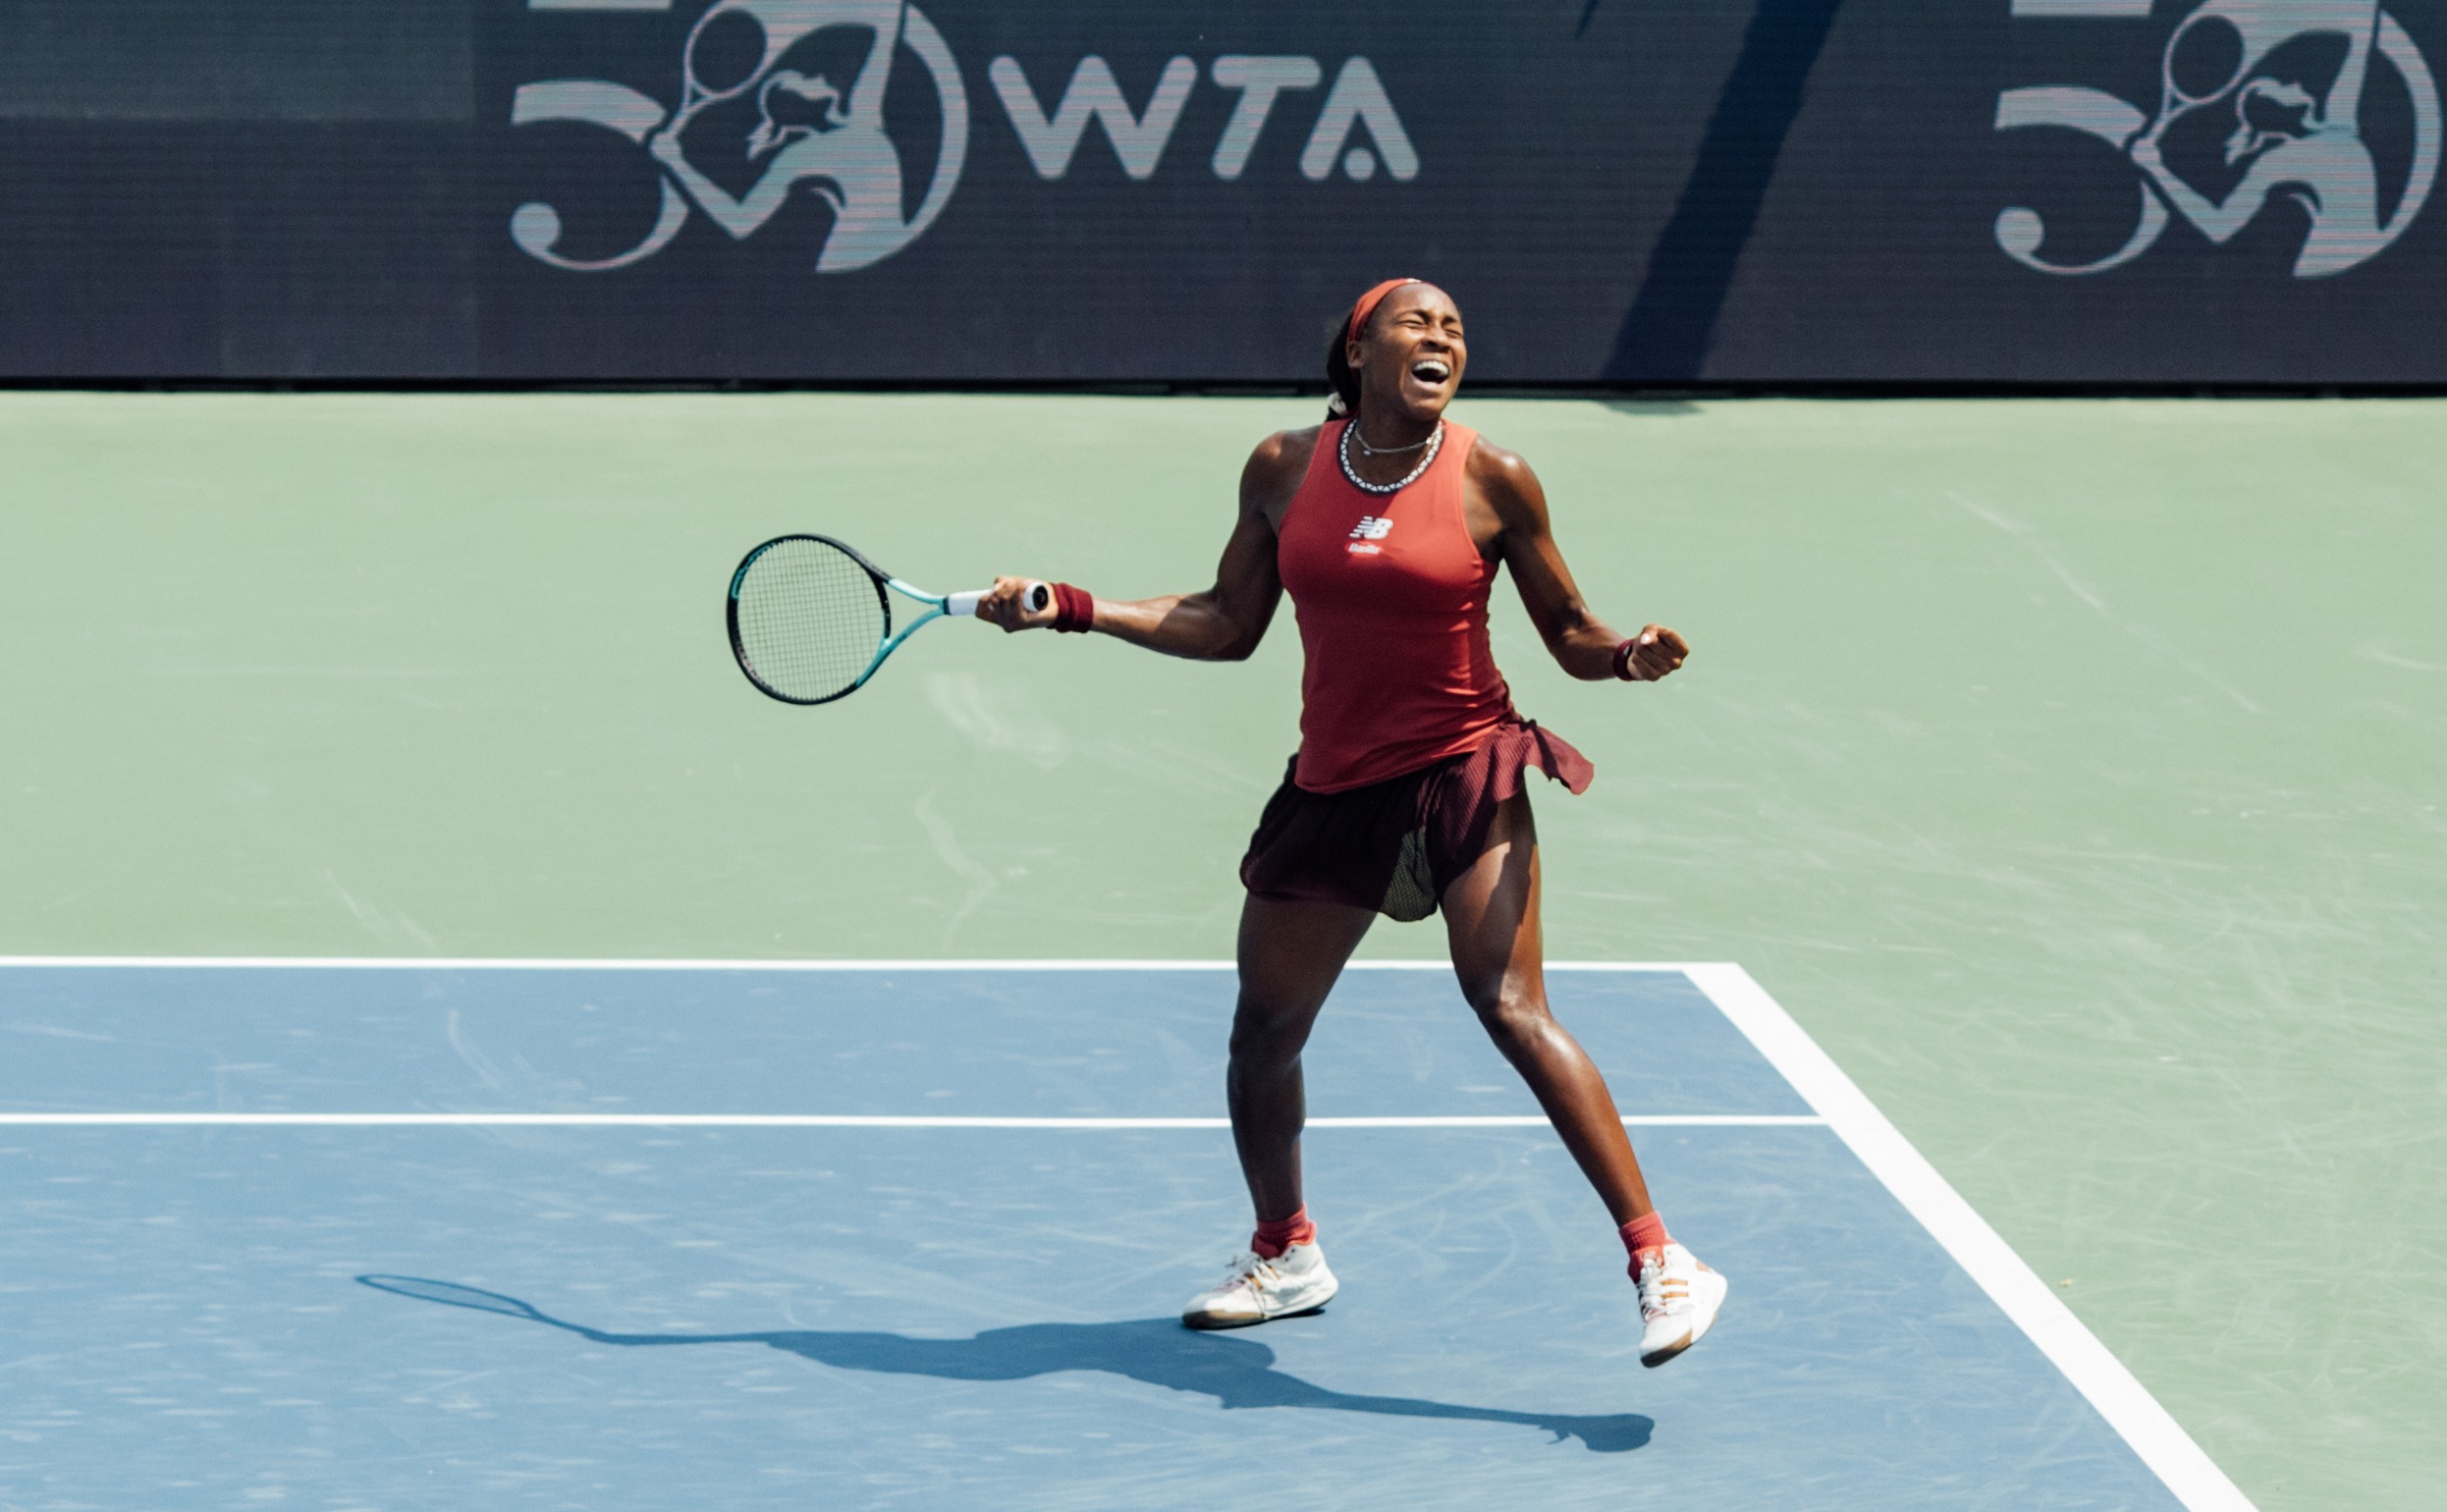 Warrior” Coco Gauff finally solves Iga Swiatek riddle with right balance of attack and defense